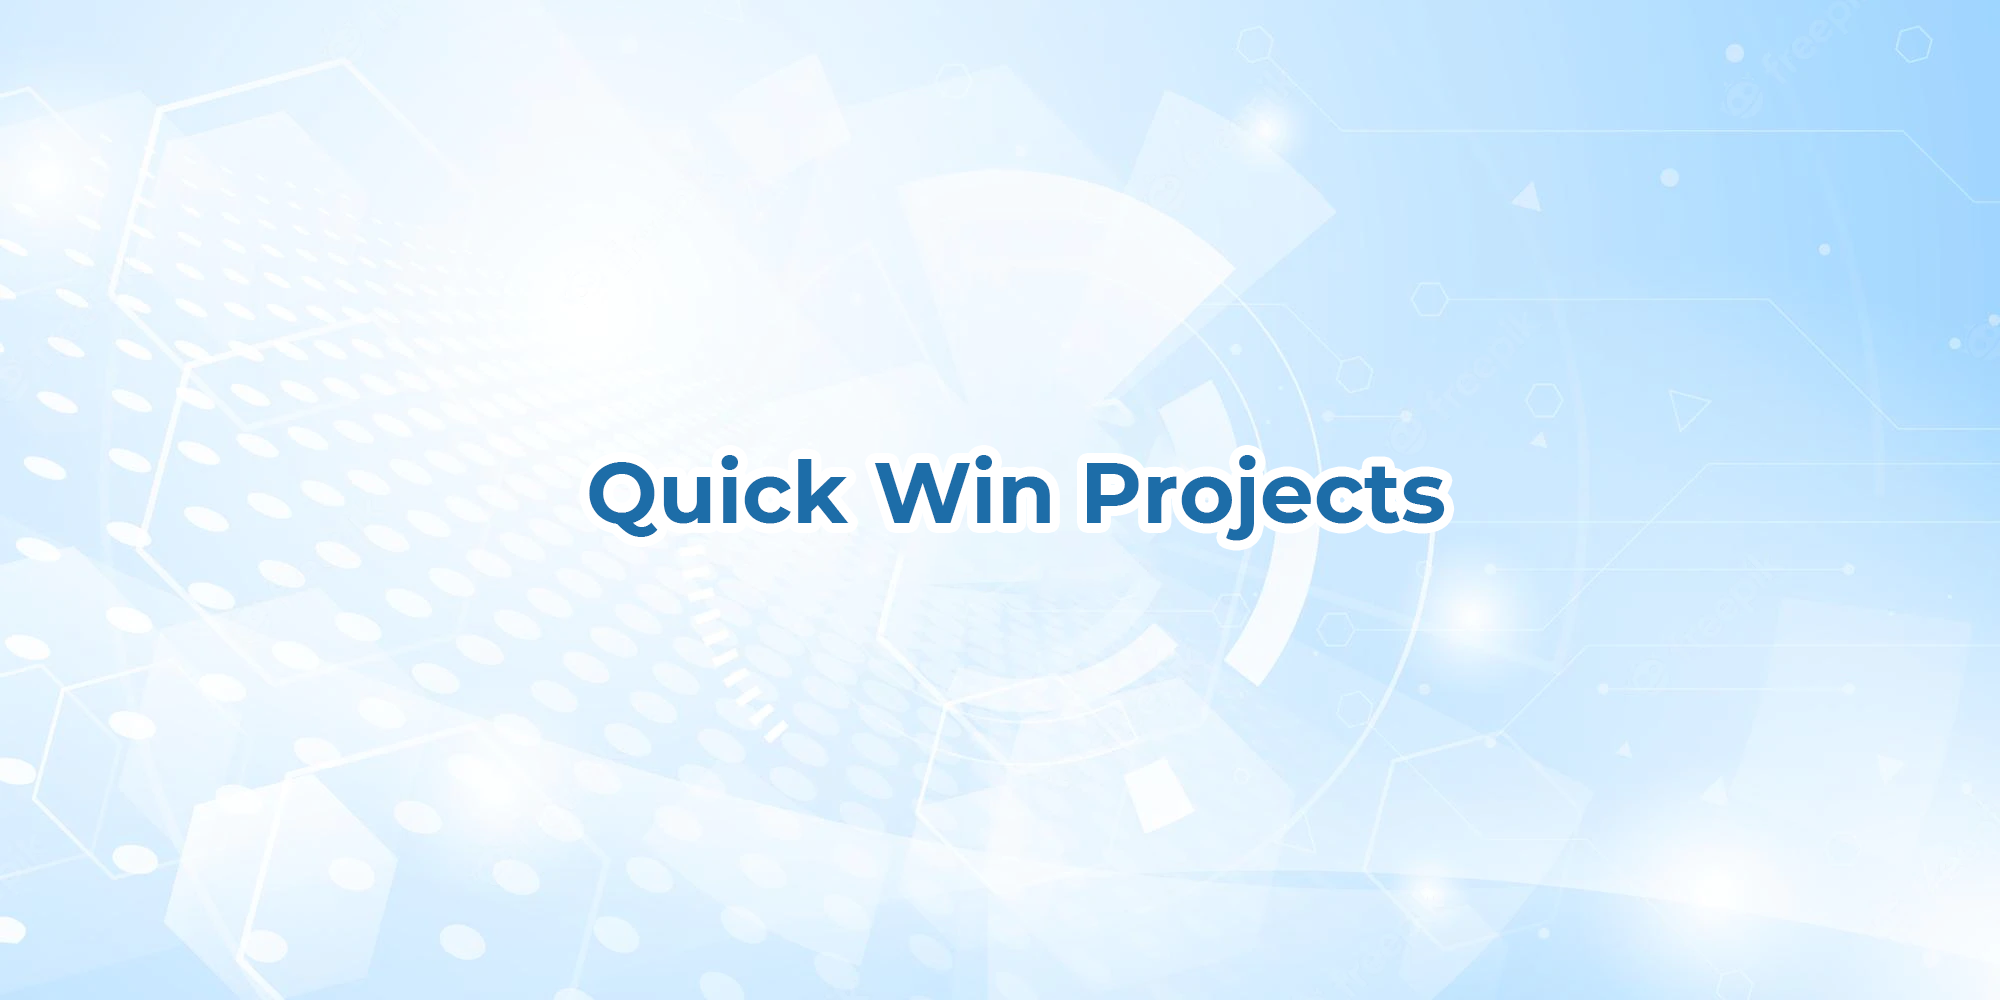 Quick Win Projects